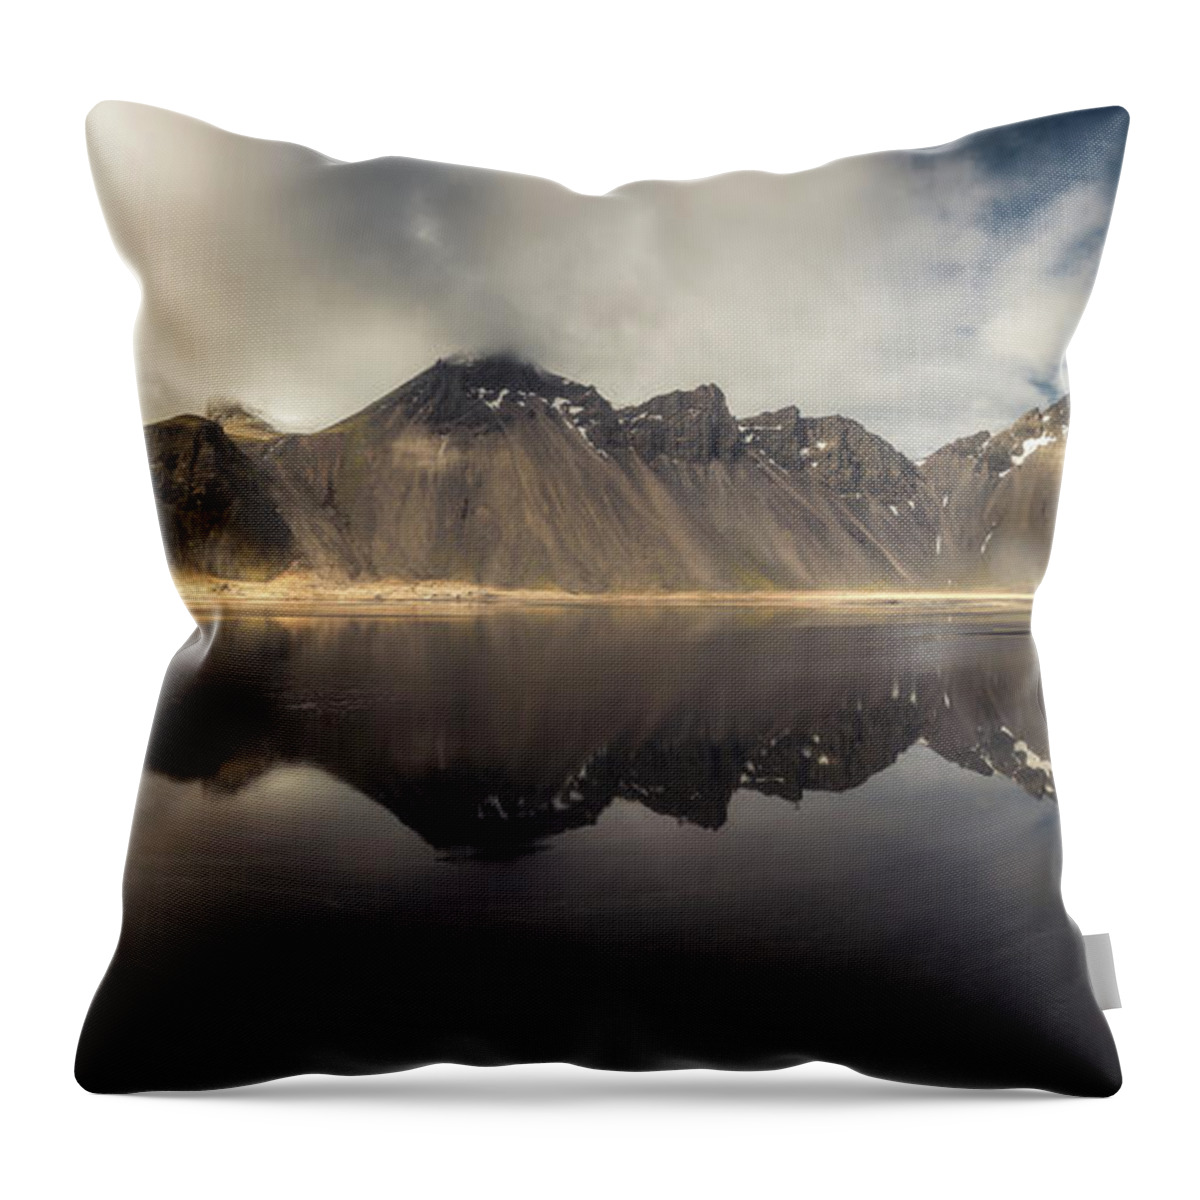 Vestrahorn Throw Pillow featuring the photograph Vestrahorn Panorama by Tor-Ivar Naess